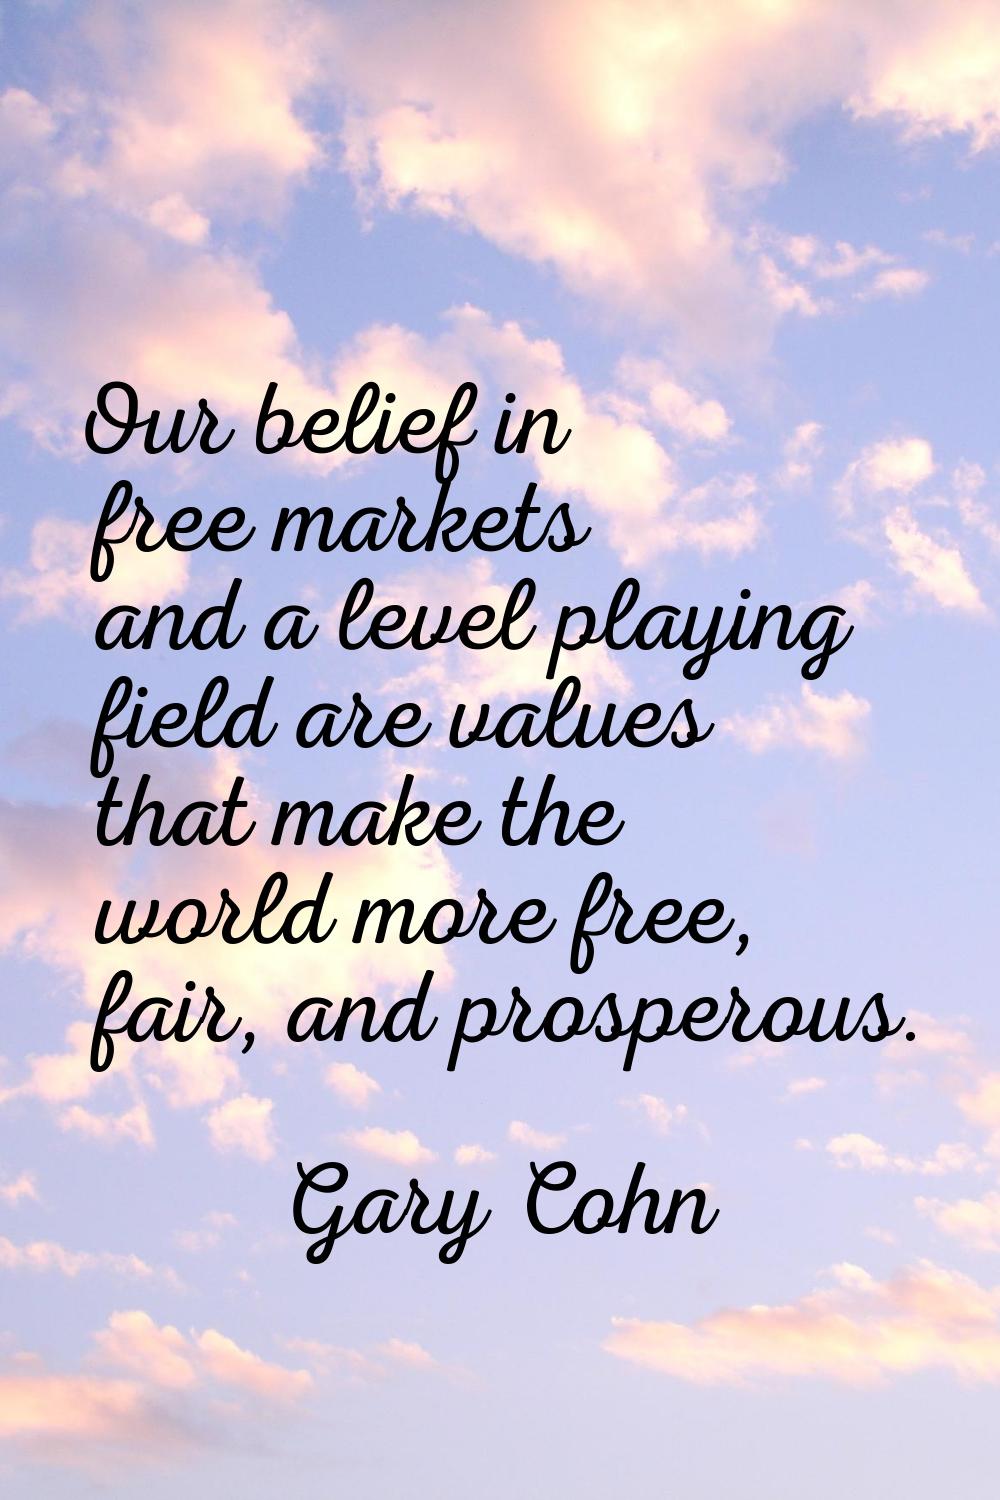 Our belief in free markets and a level playing field are values that make the world more free, fair